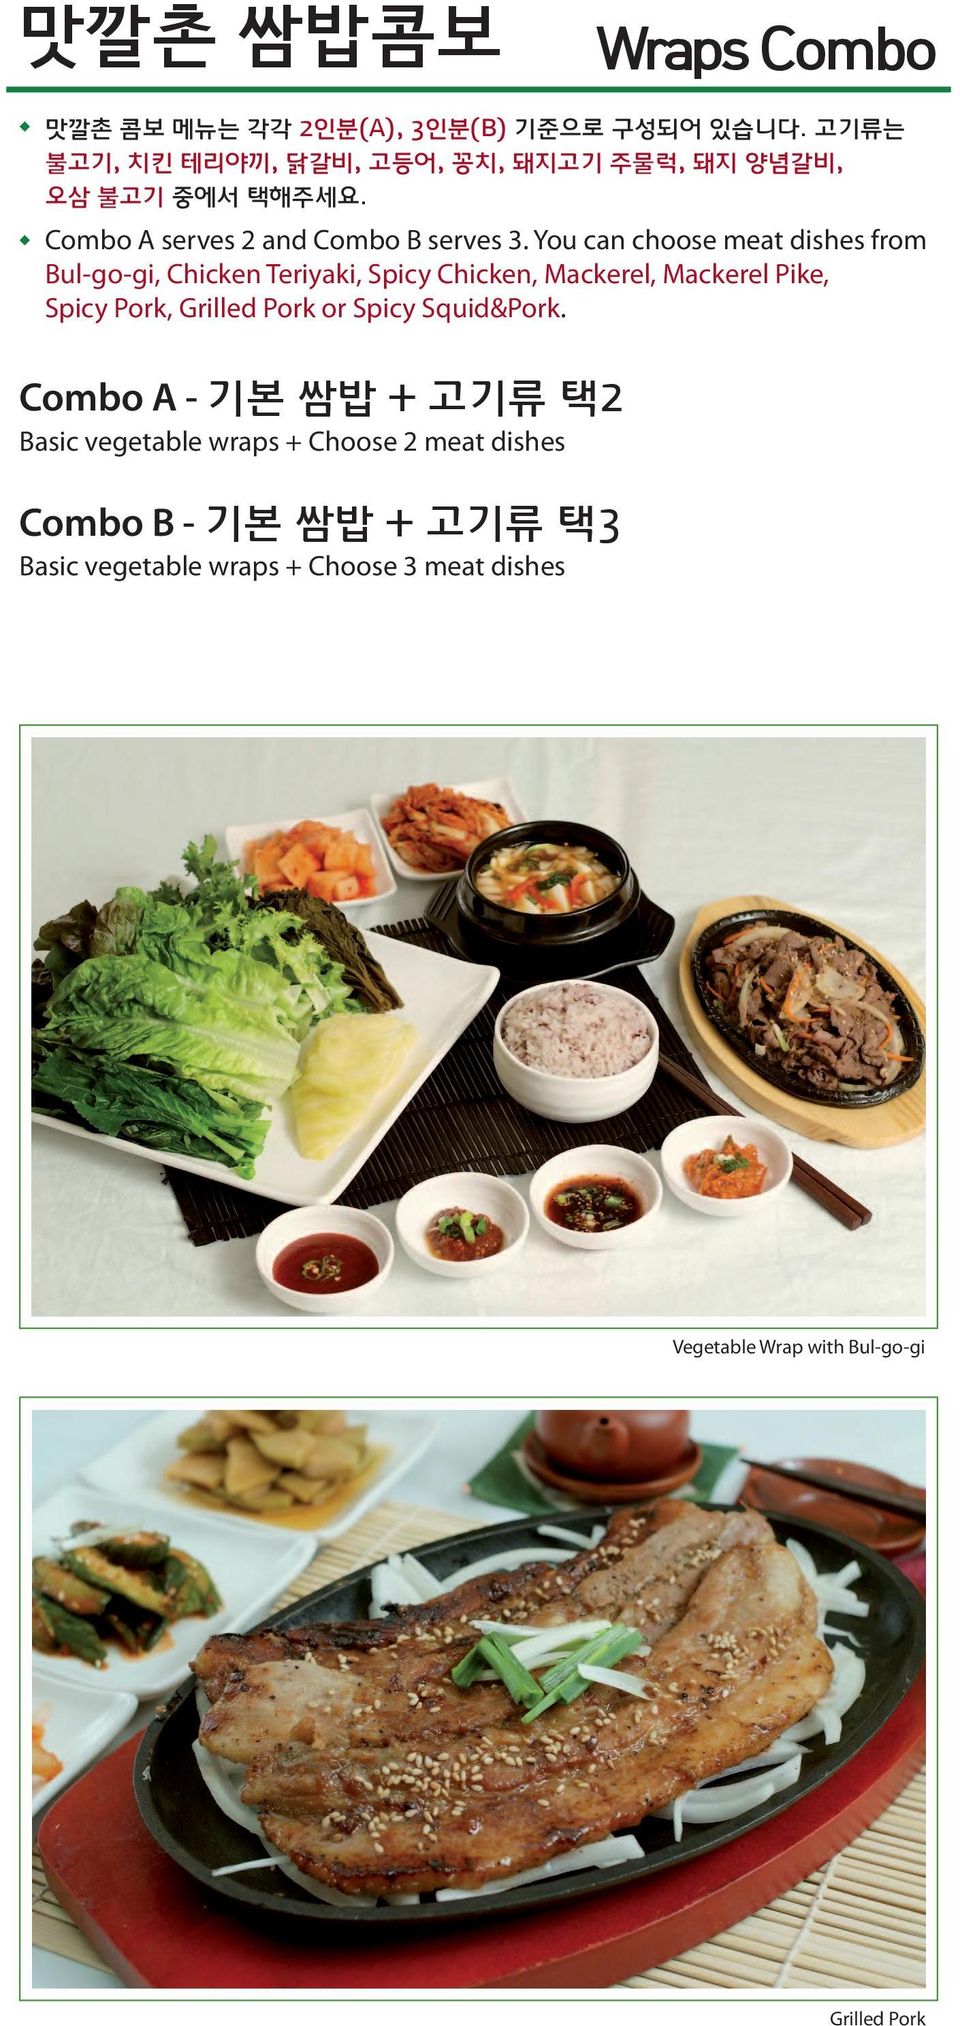 You can choose meat dishes from Bul-go-gi, Chicken Teriyaki, Spicy Chicken, Mackerel, Mackerel Pike, Spicy Pork, Grilled Pork